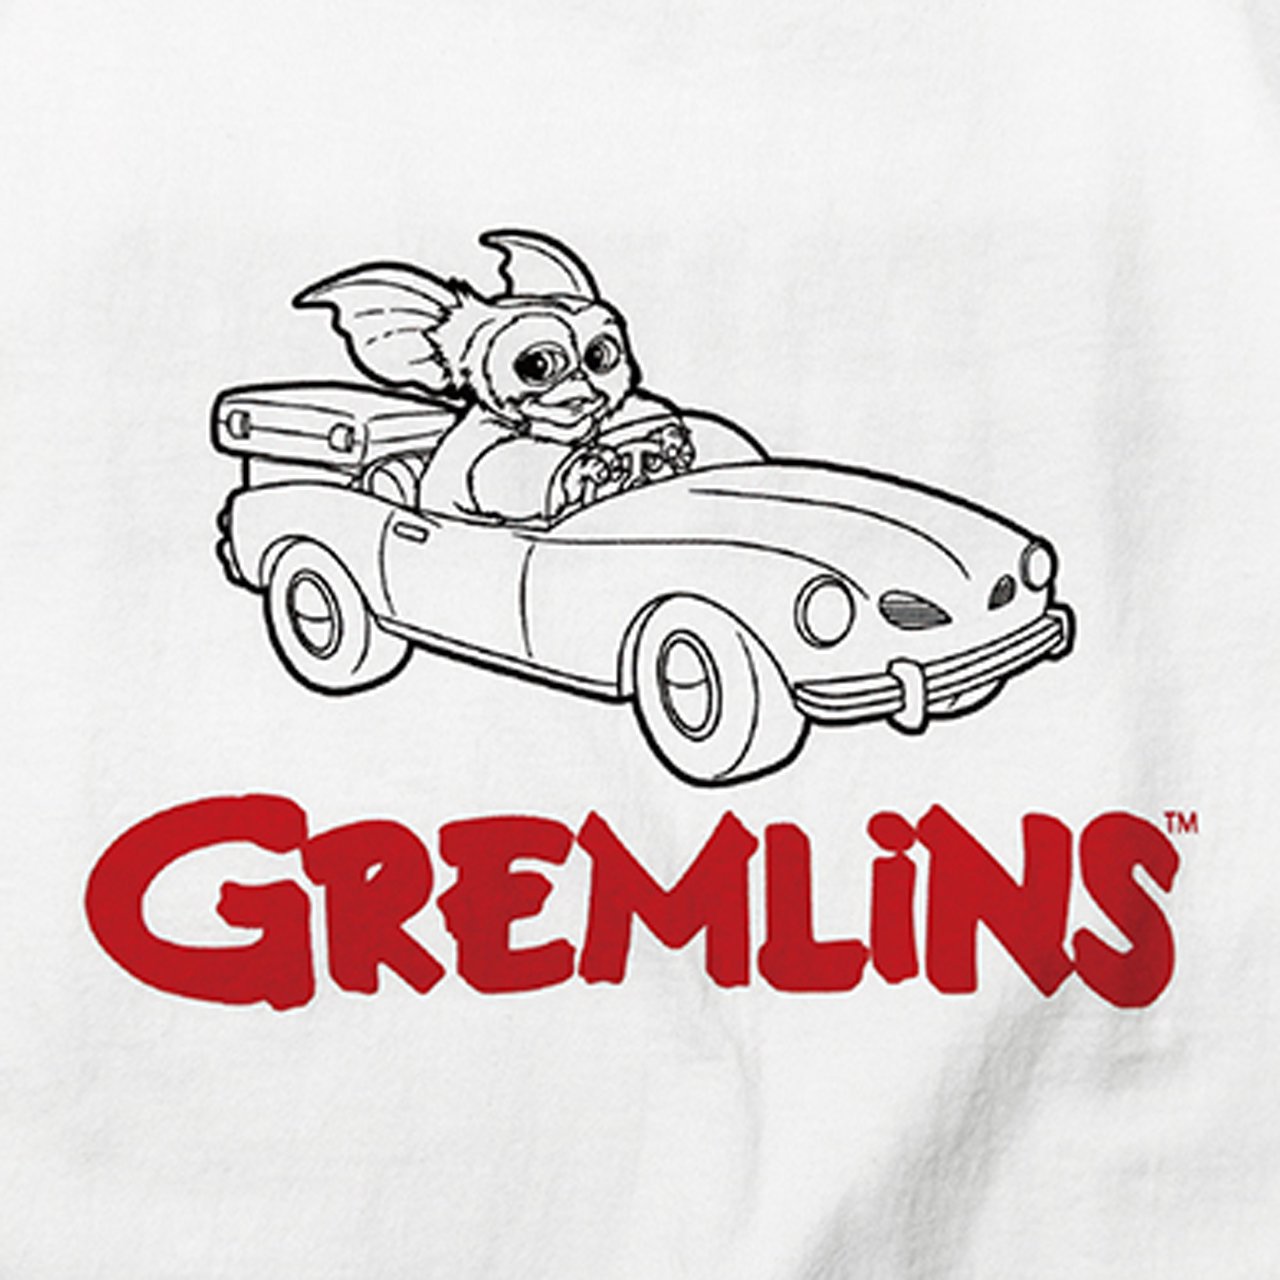 <img class='new_mark_img1' src='https://img.shop-pro.jp/img/new/icons5.gif' style='border:none;display:inline;margin:0px;padding:0px;width:auto;' />STANDARD CALIFORNIA ( ե˥)GREMLINS  SD Logo T & NICI Stuffed Toy White